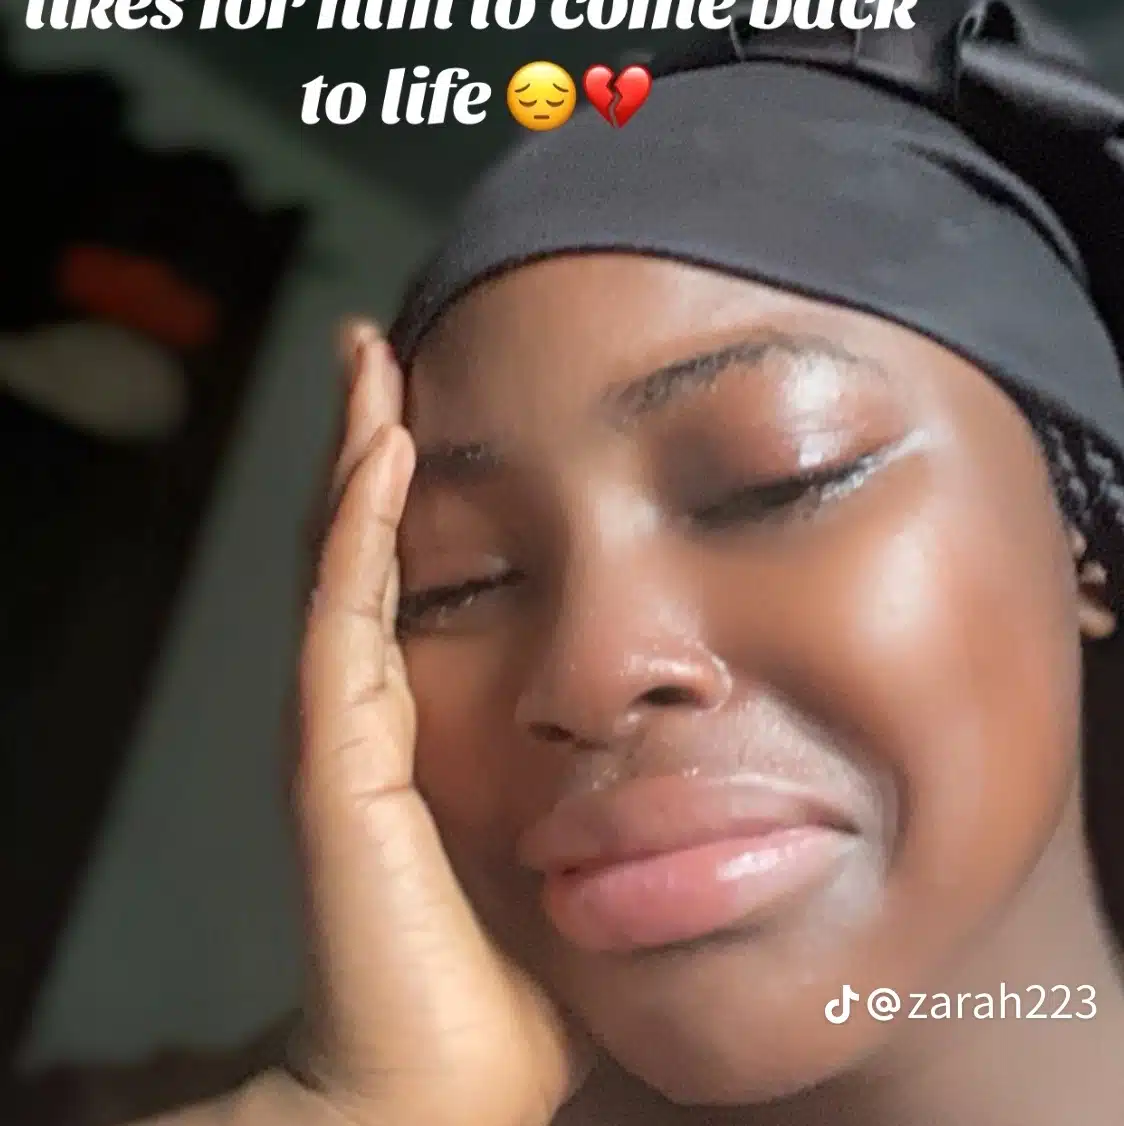 Video of Nigerian lady asking late friend for likes to return to life goes viral